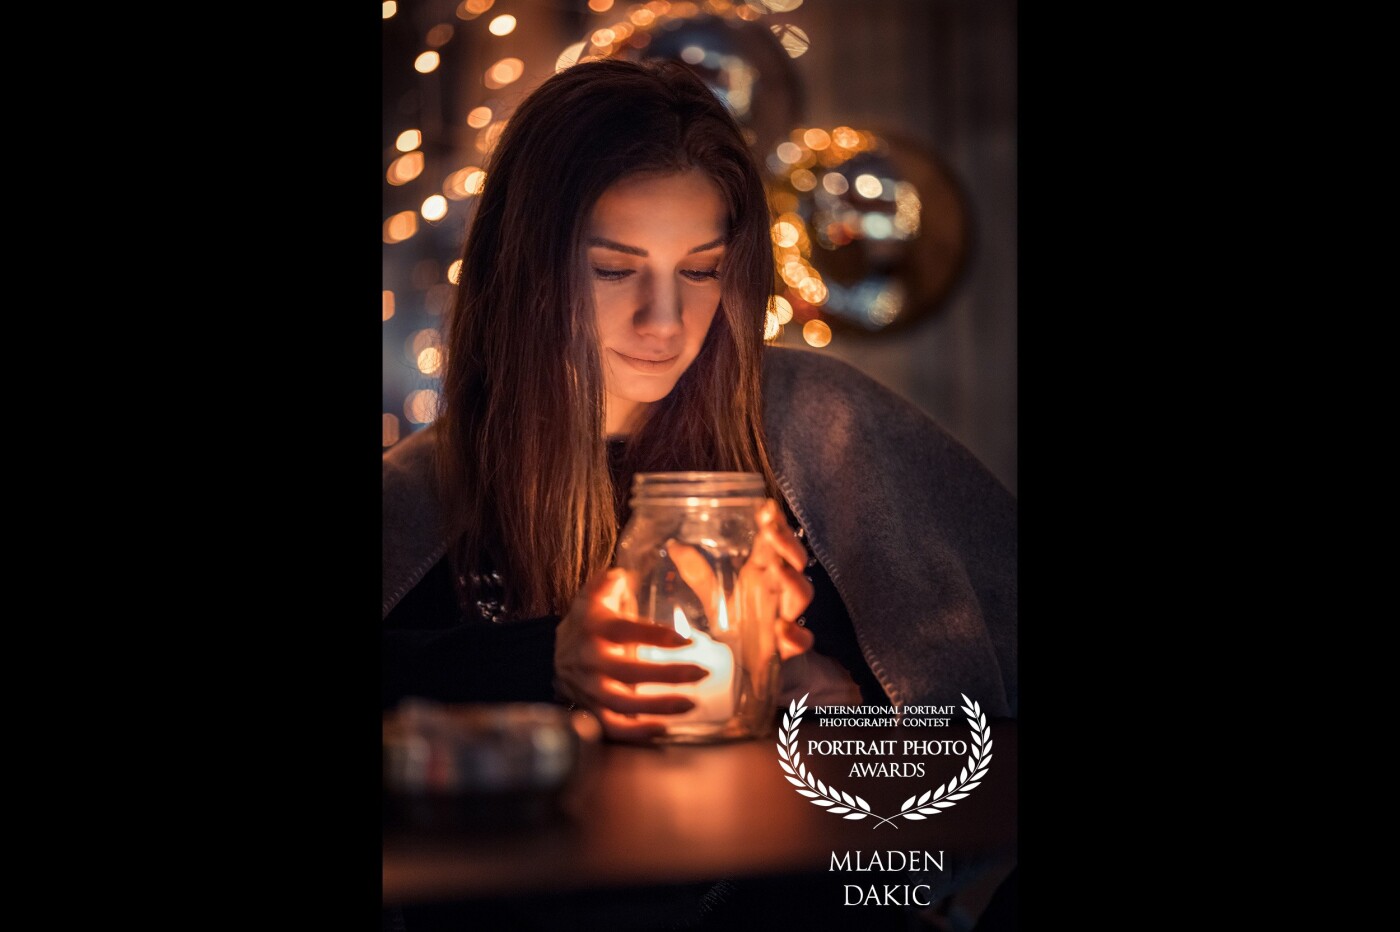 Unfortunately, this picture is not new. My model Yllnore and I walked in December 2018 through the pre-Christmas Bern and took very nice photos. One of them is "Warm light gives a warm heart" which shows the Christmas candles and their light very nicely. I used natural light only.